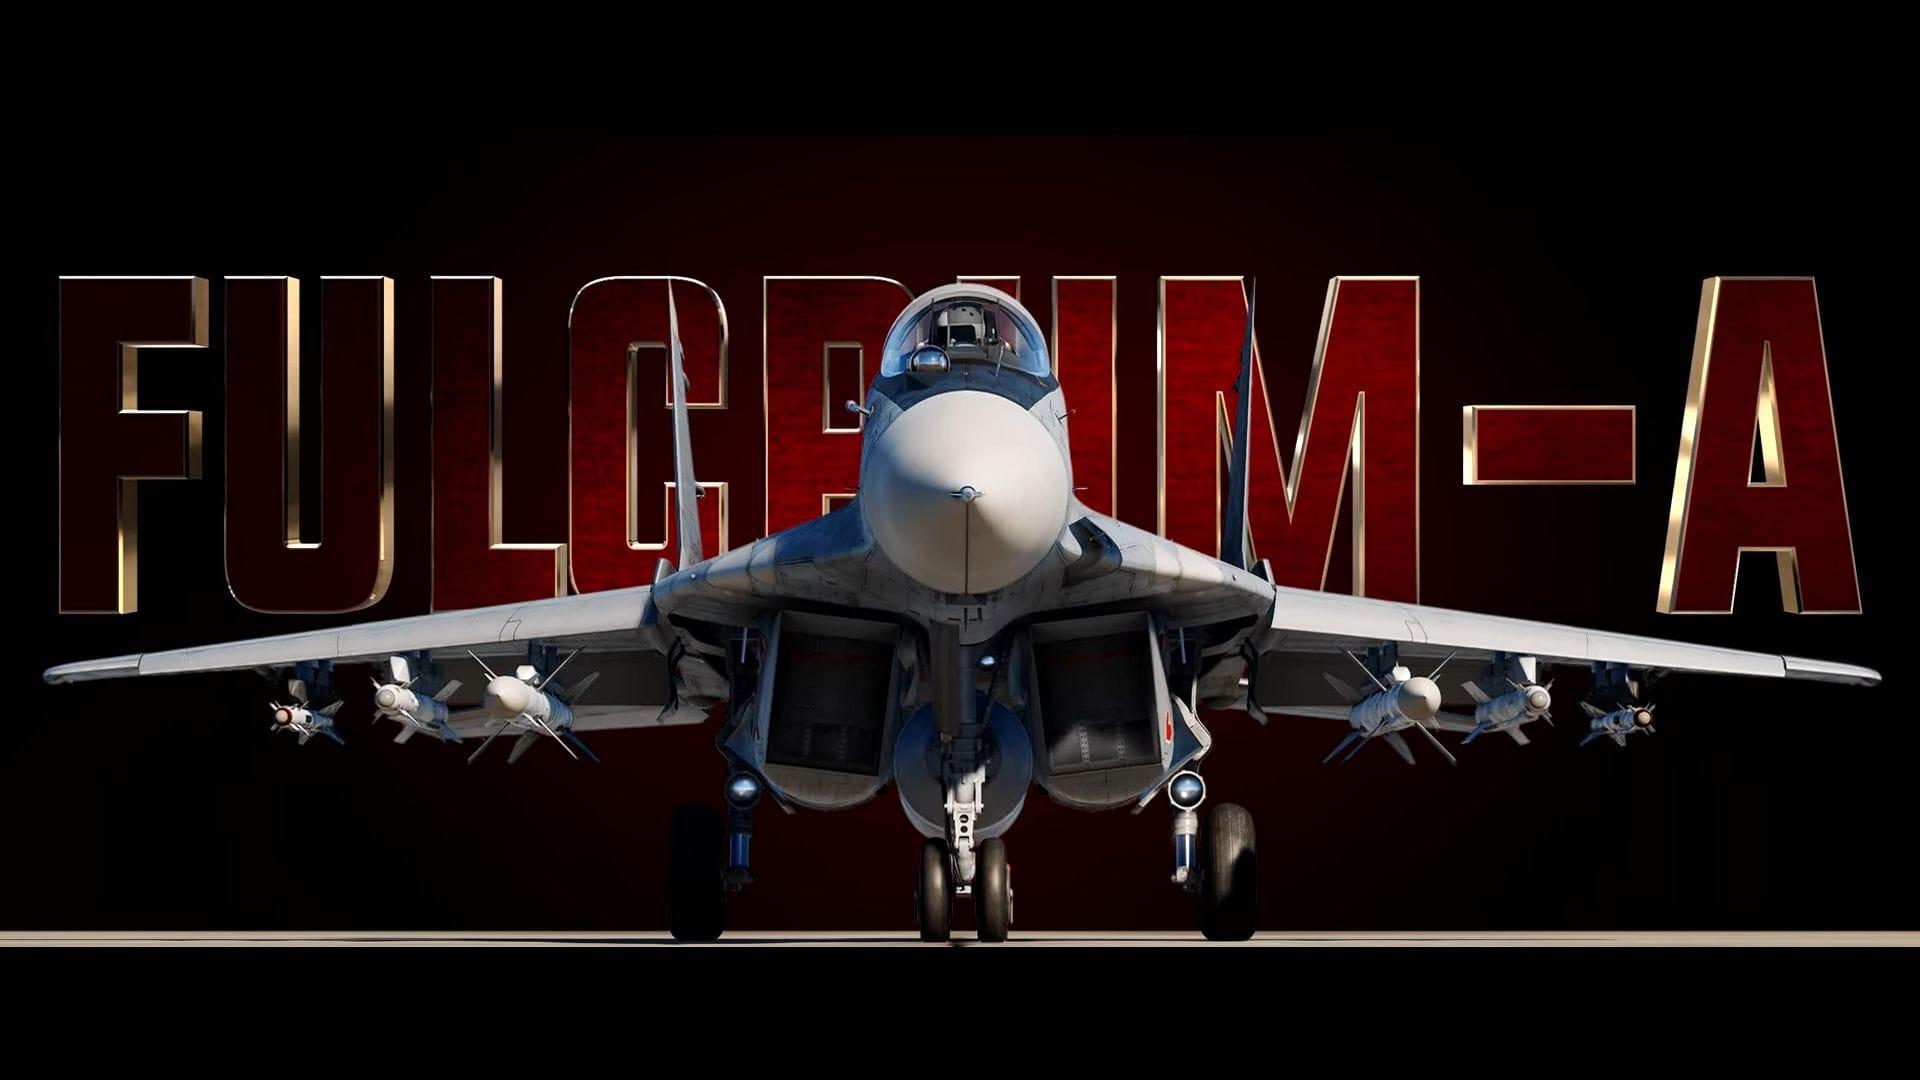 DCS World Reveals Upcoming Content Including “Full Fidelity” Mig-29A Fulcrum, Iraq Map, and More